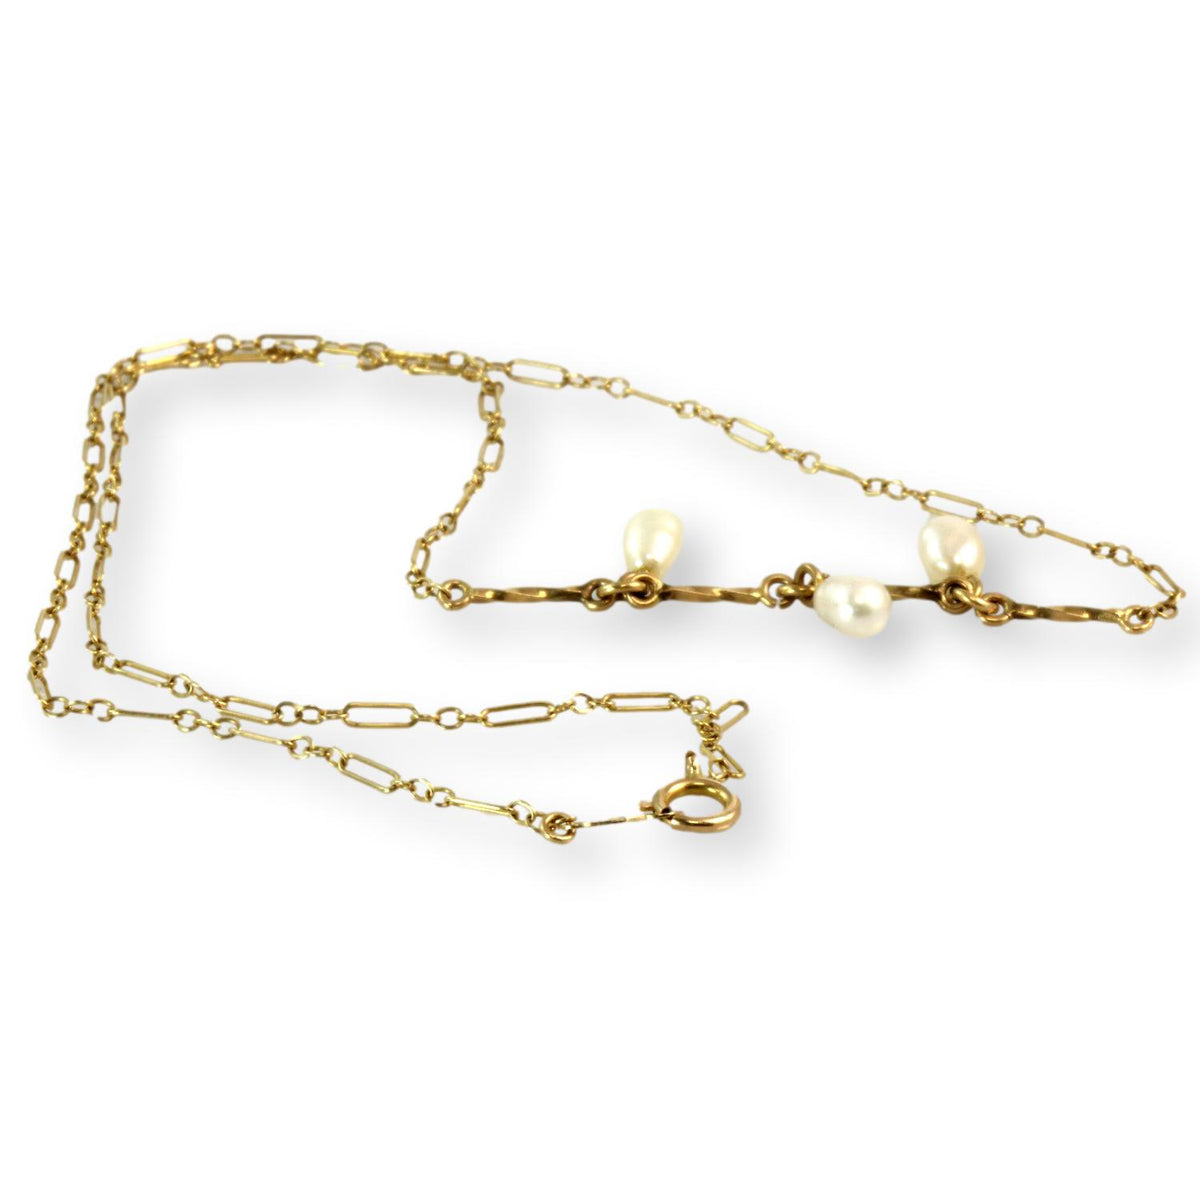 White Cultured Pearl 14K Yellow Gold Station Necklace